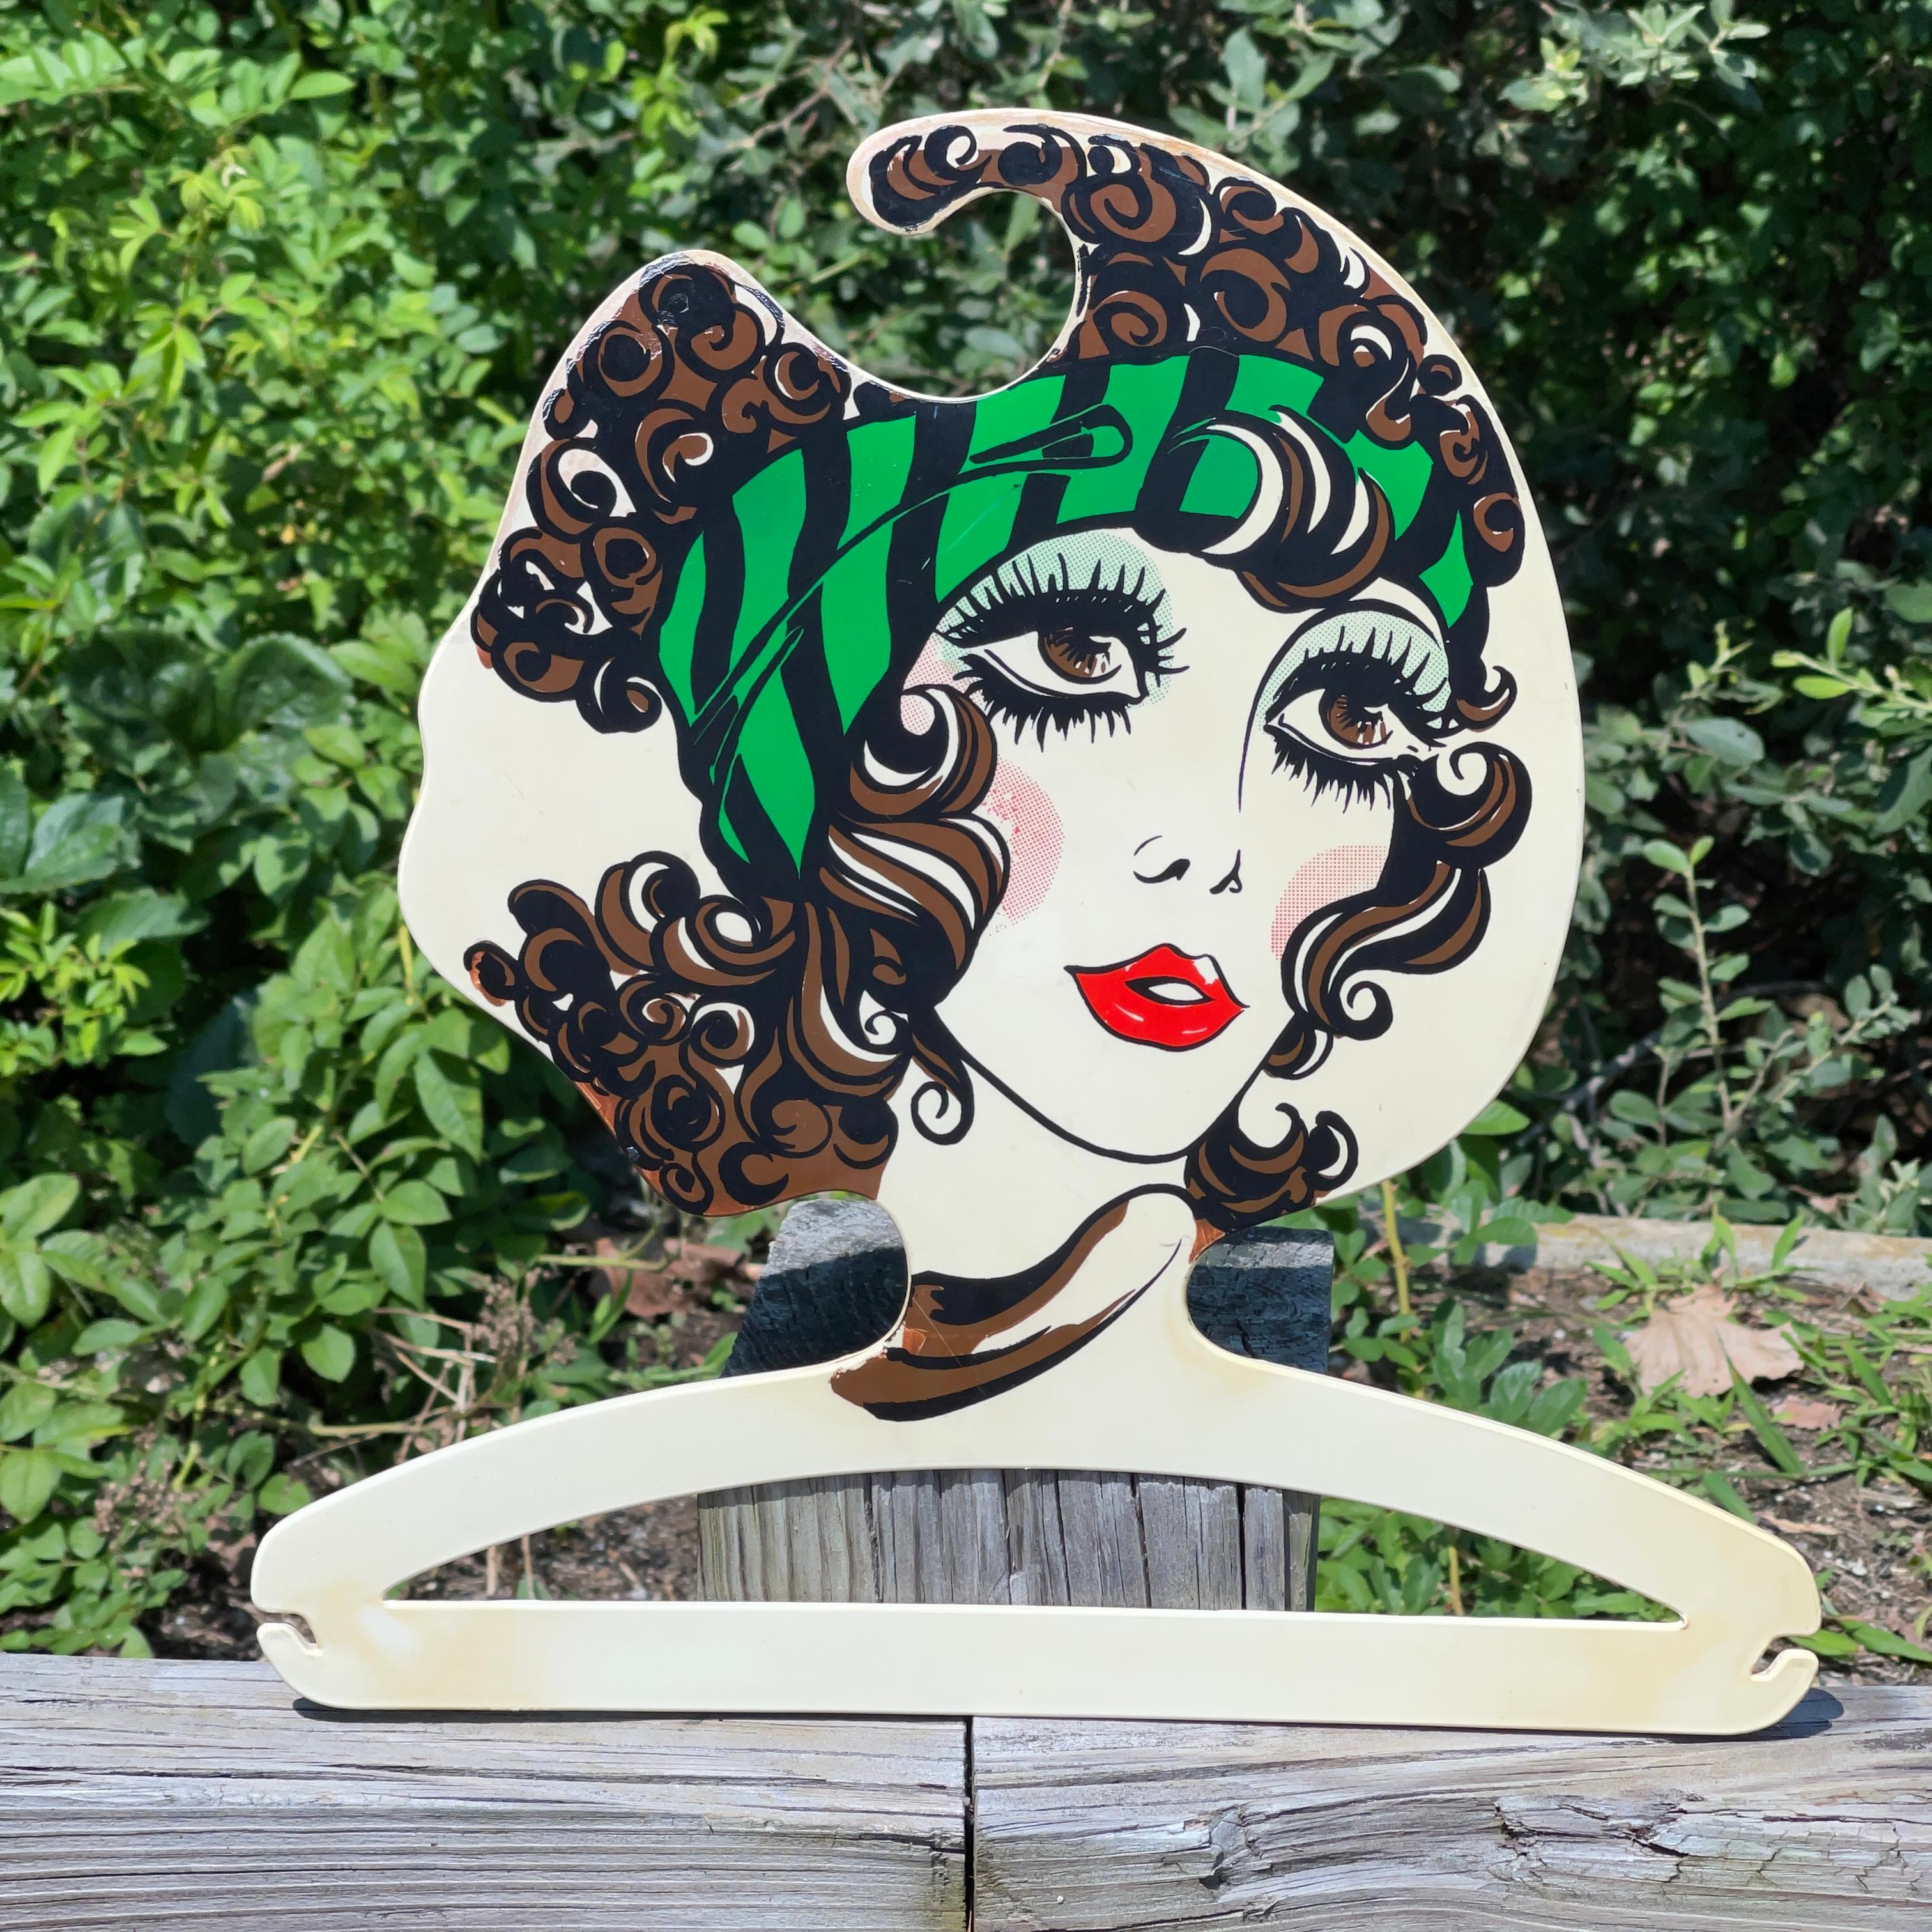 1960's Italian plastic coat hanger with stylized head and face of a fashionable young woman applied via lithograph transfer.
Produced in Italy by BG Milano (No relation but I love the sound of it!)
Alas, we have just this one but continue to hunt